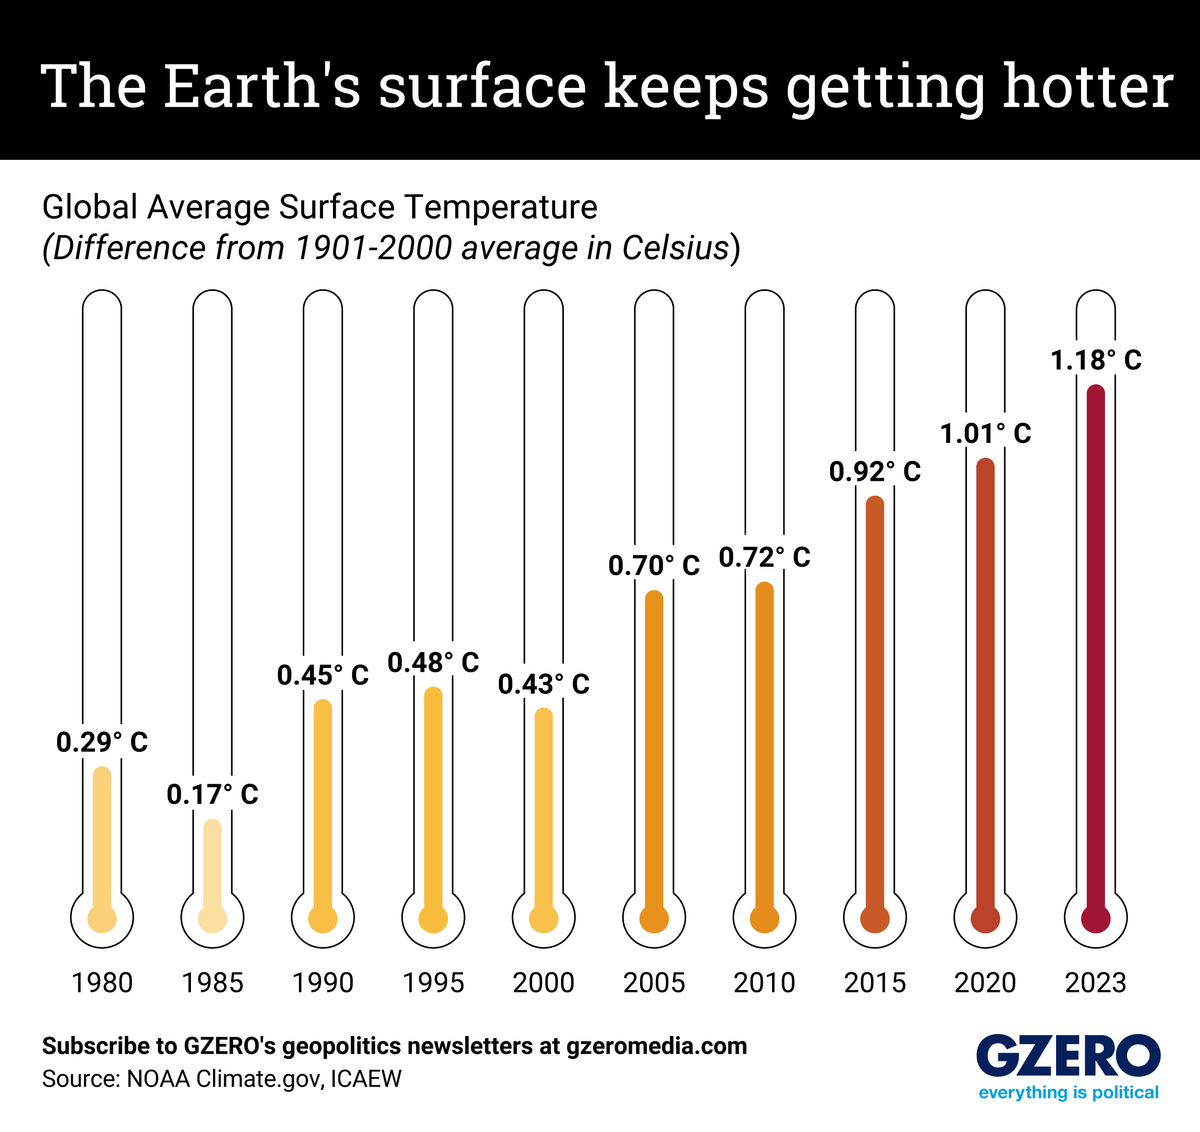 The Graphic Truth: The Earth is getting hotter, and it’s our fault